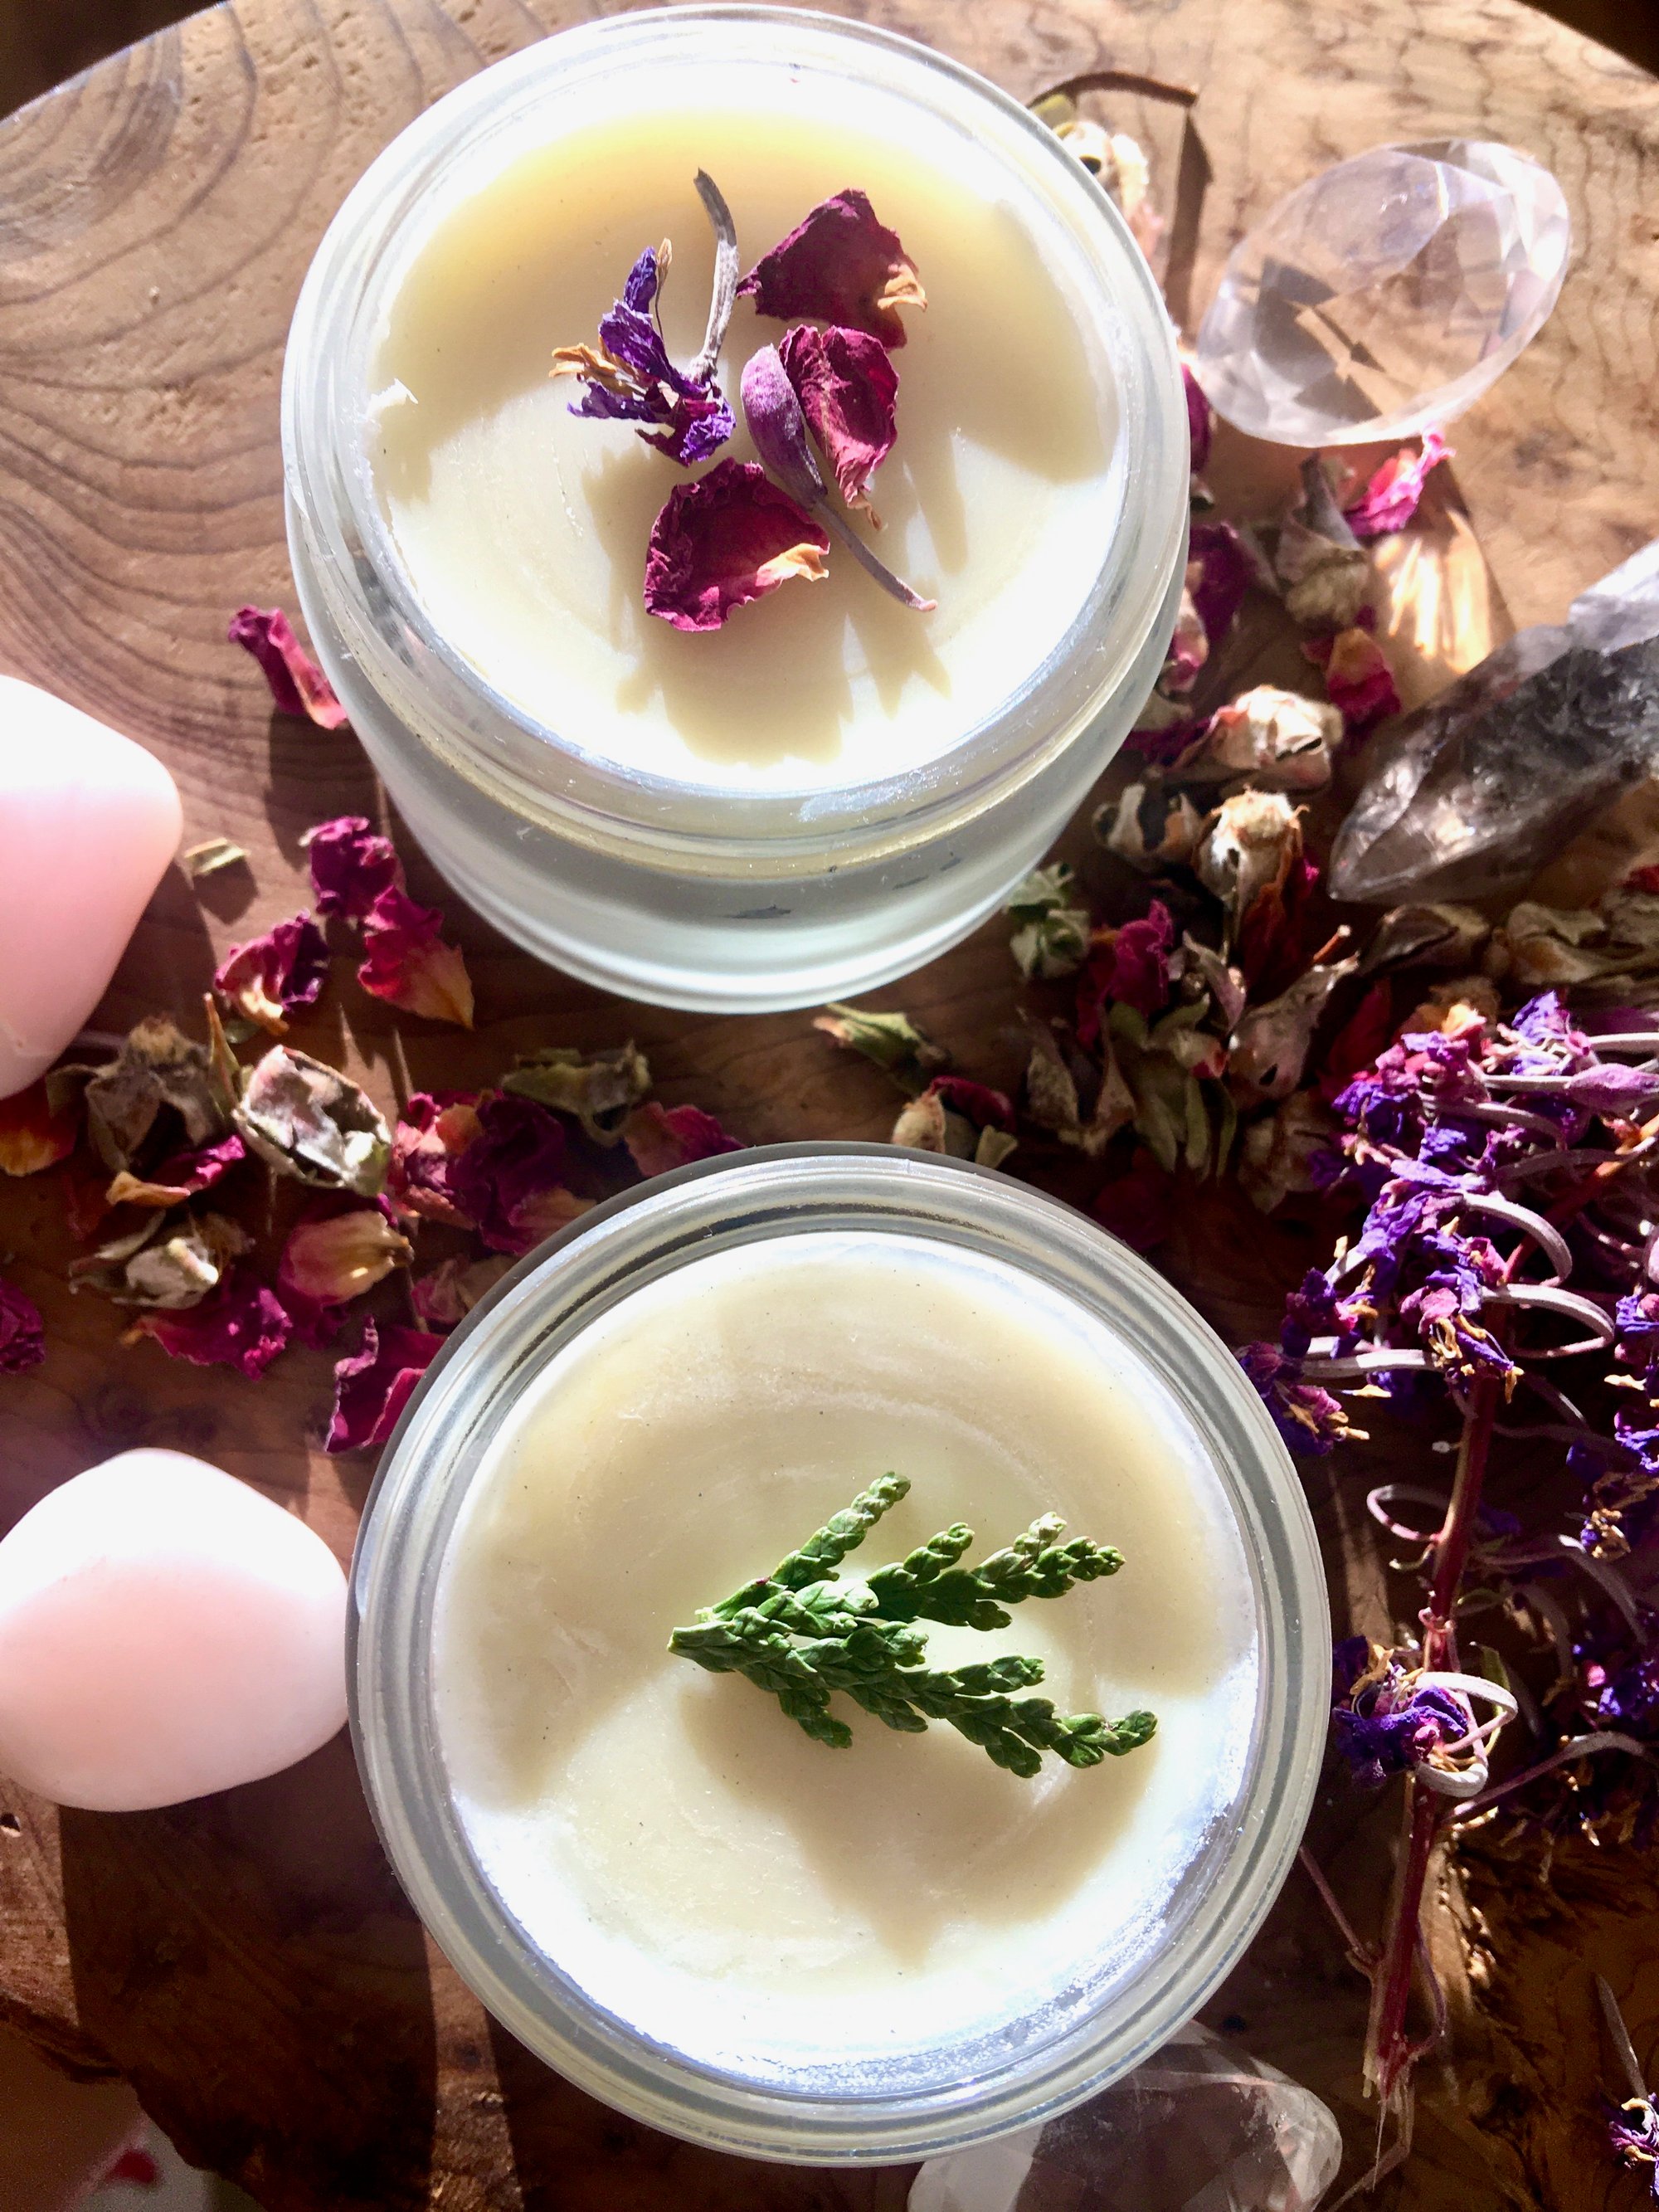 Lavender Tallow Face and Body Balm